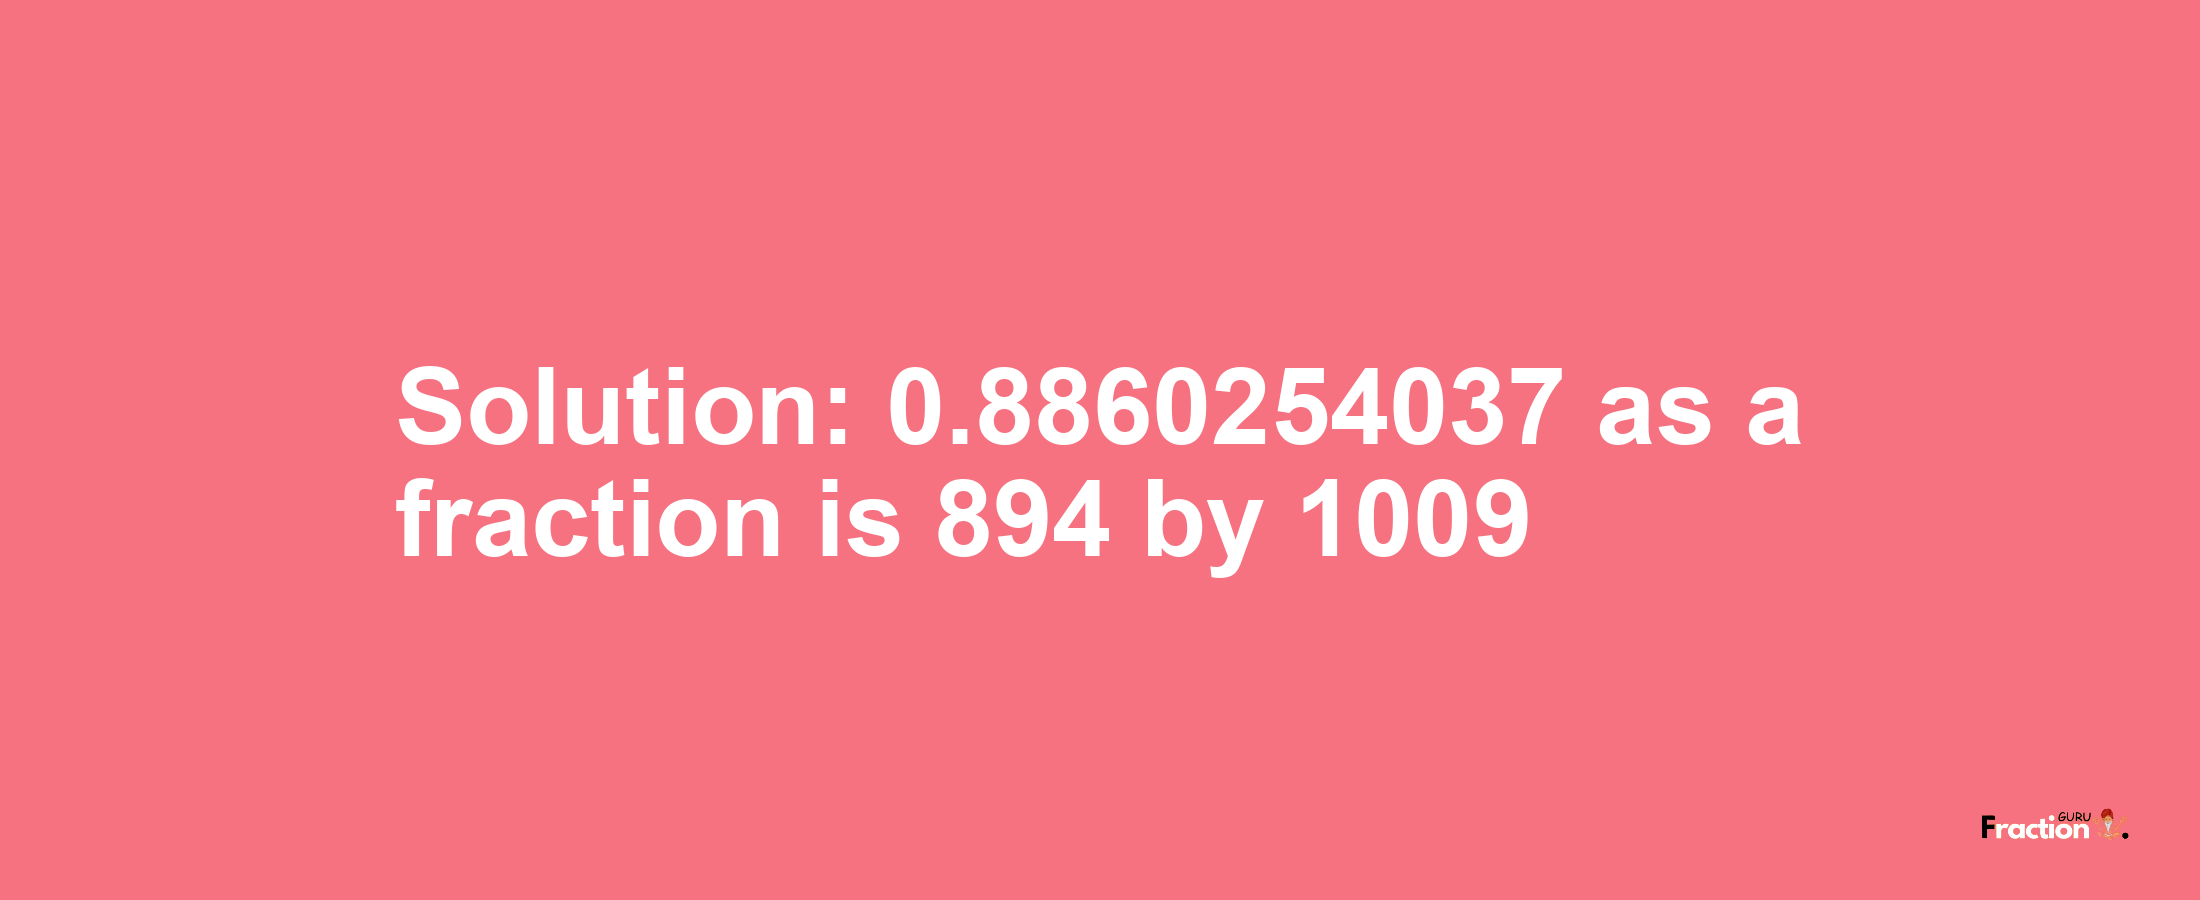 Solution:0.8860254037 as a fraction is 894/1009